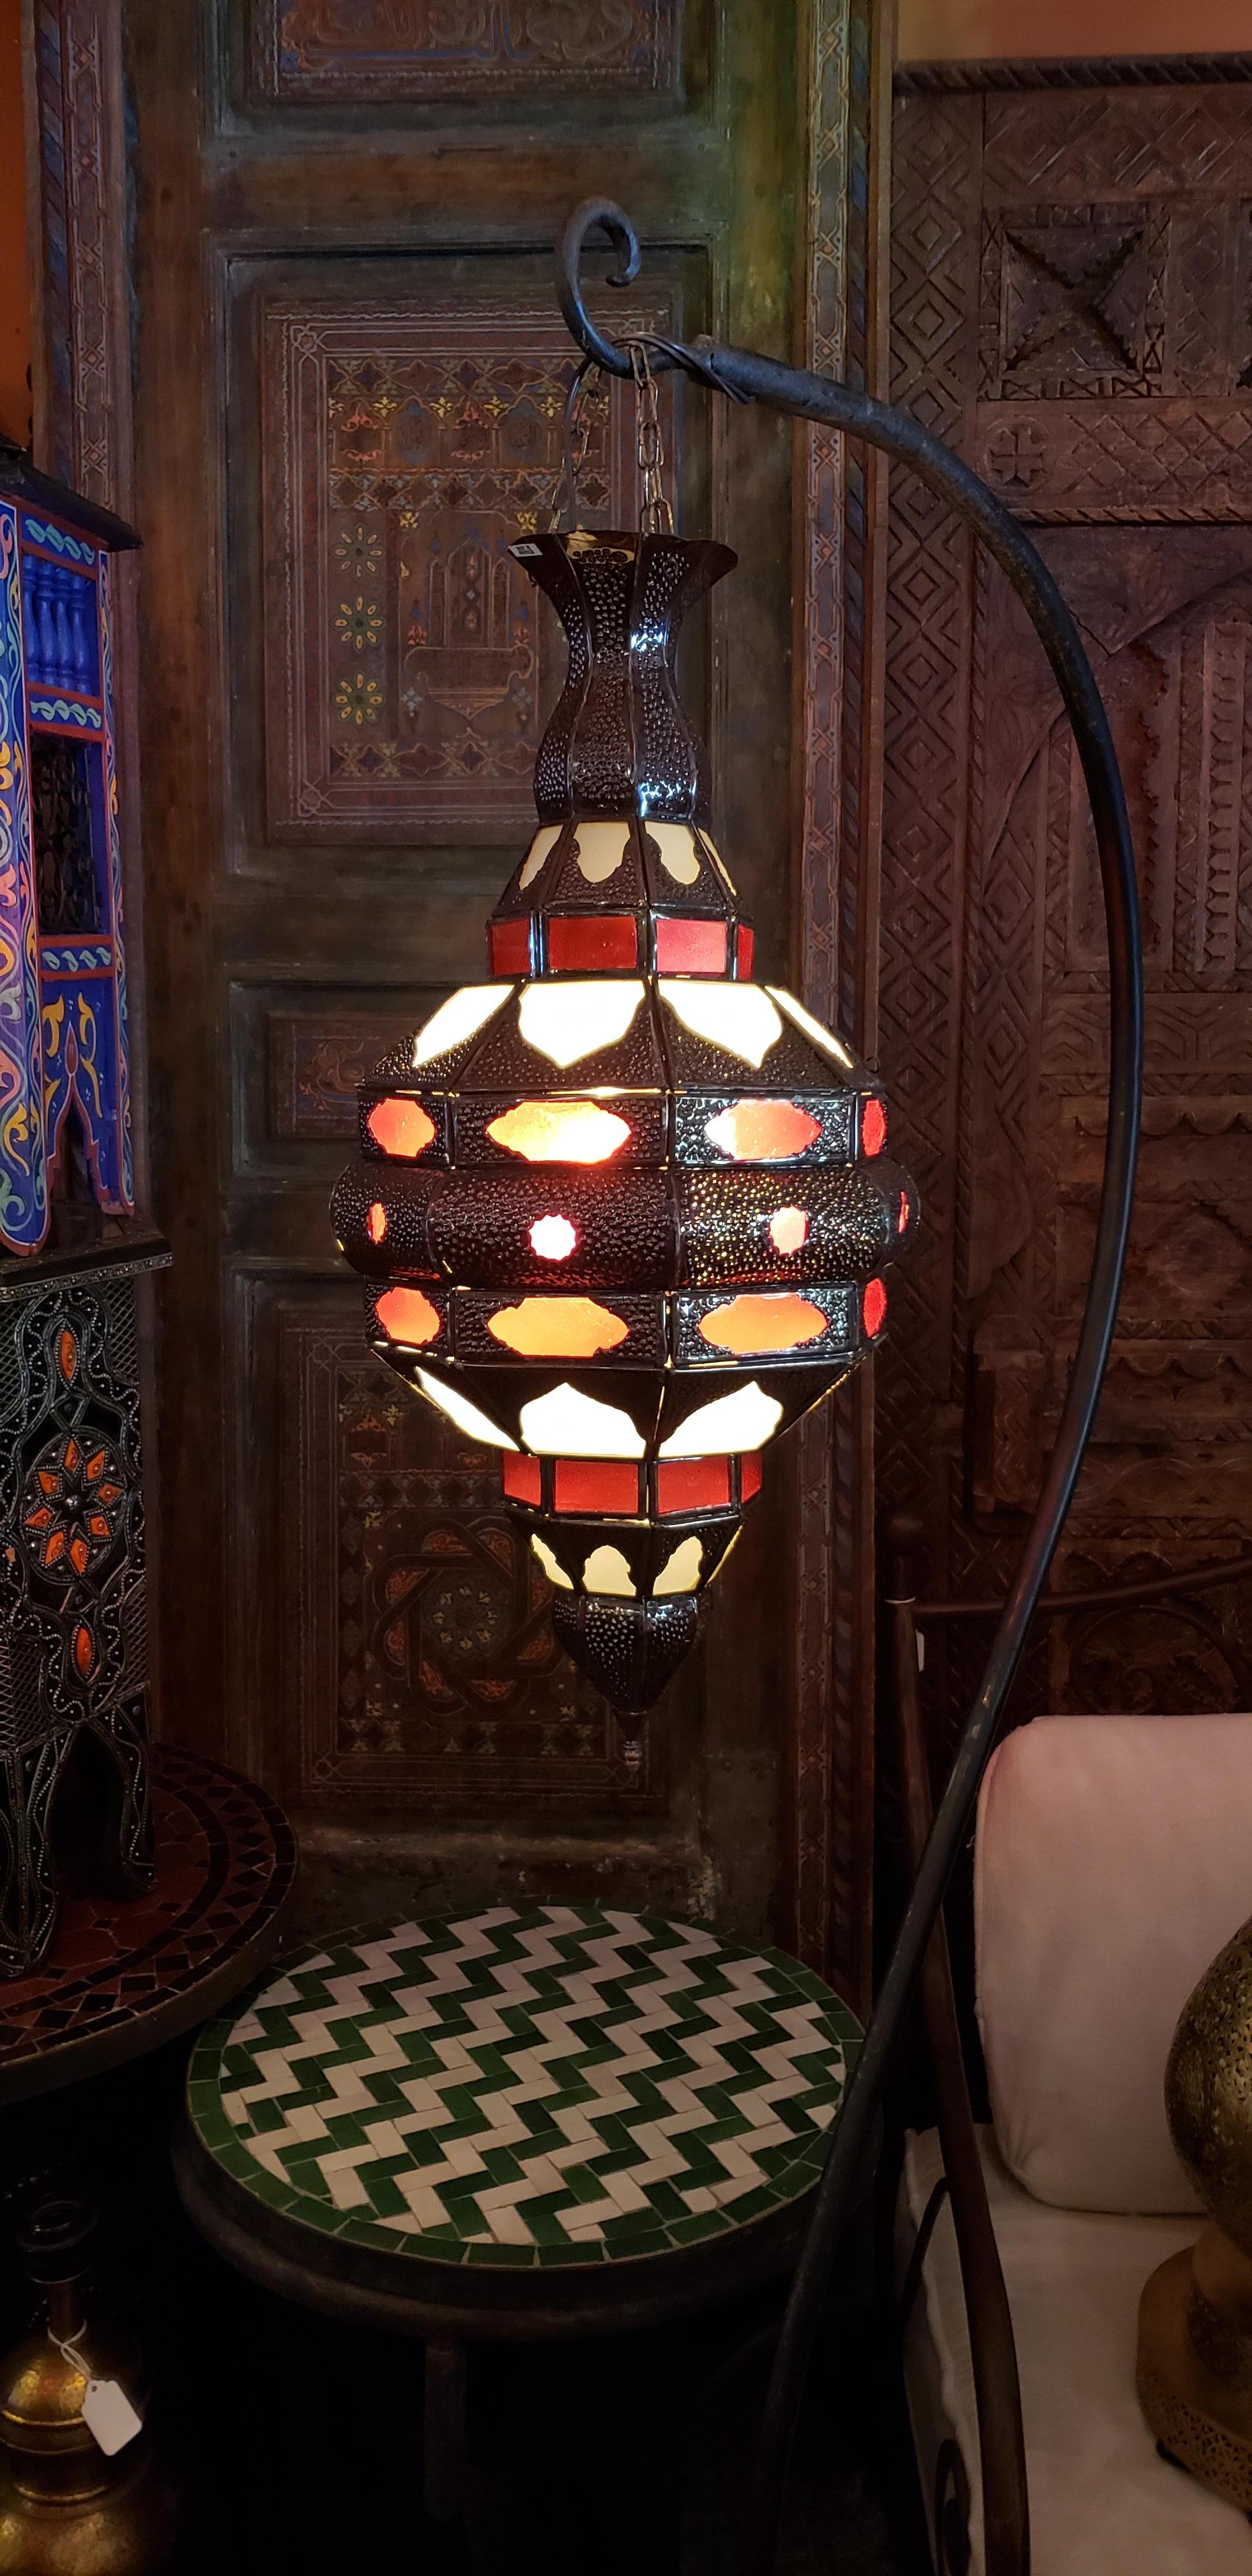 Handmade Moroccan glass lantern with frosty white stain glass and metal rustic frame, measuring around 24